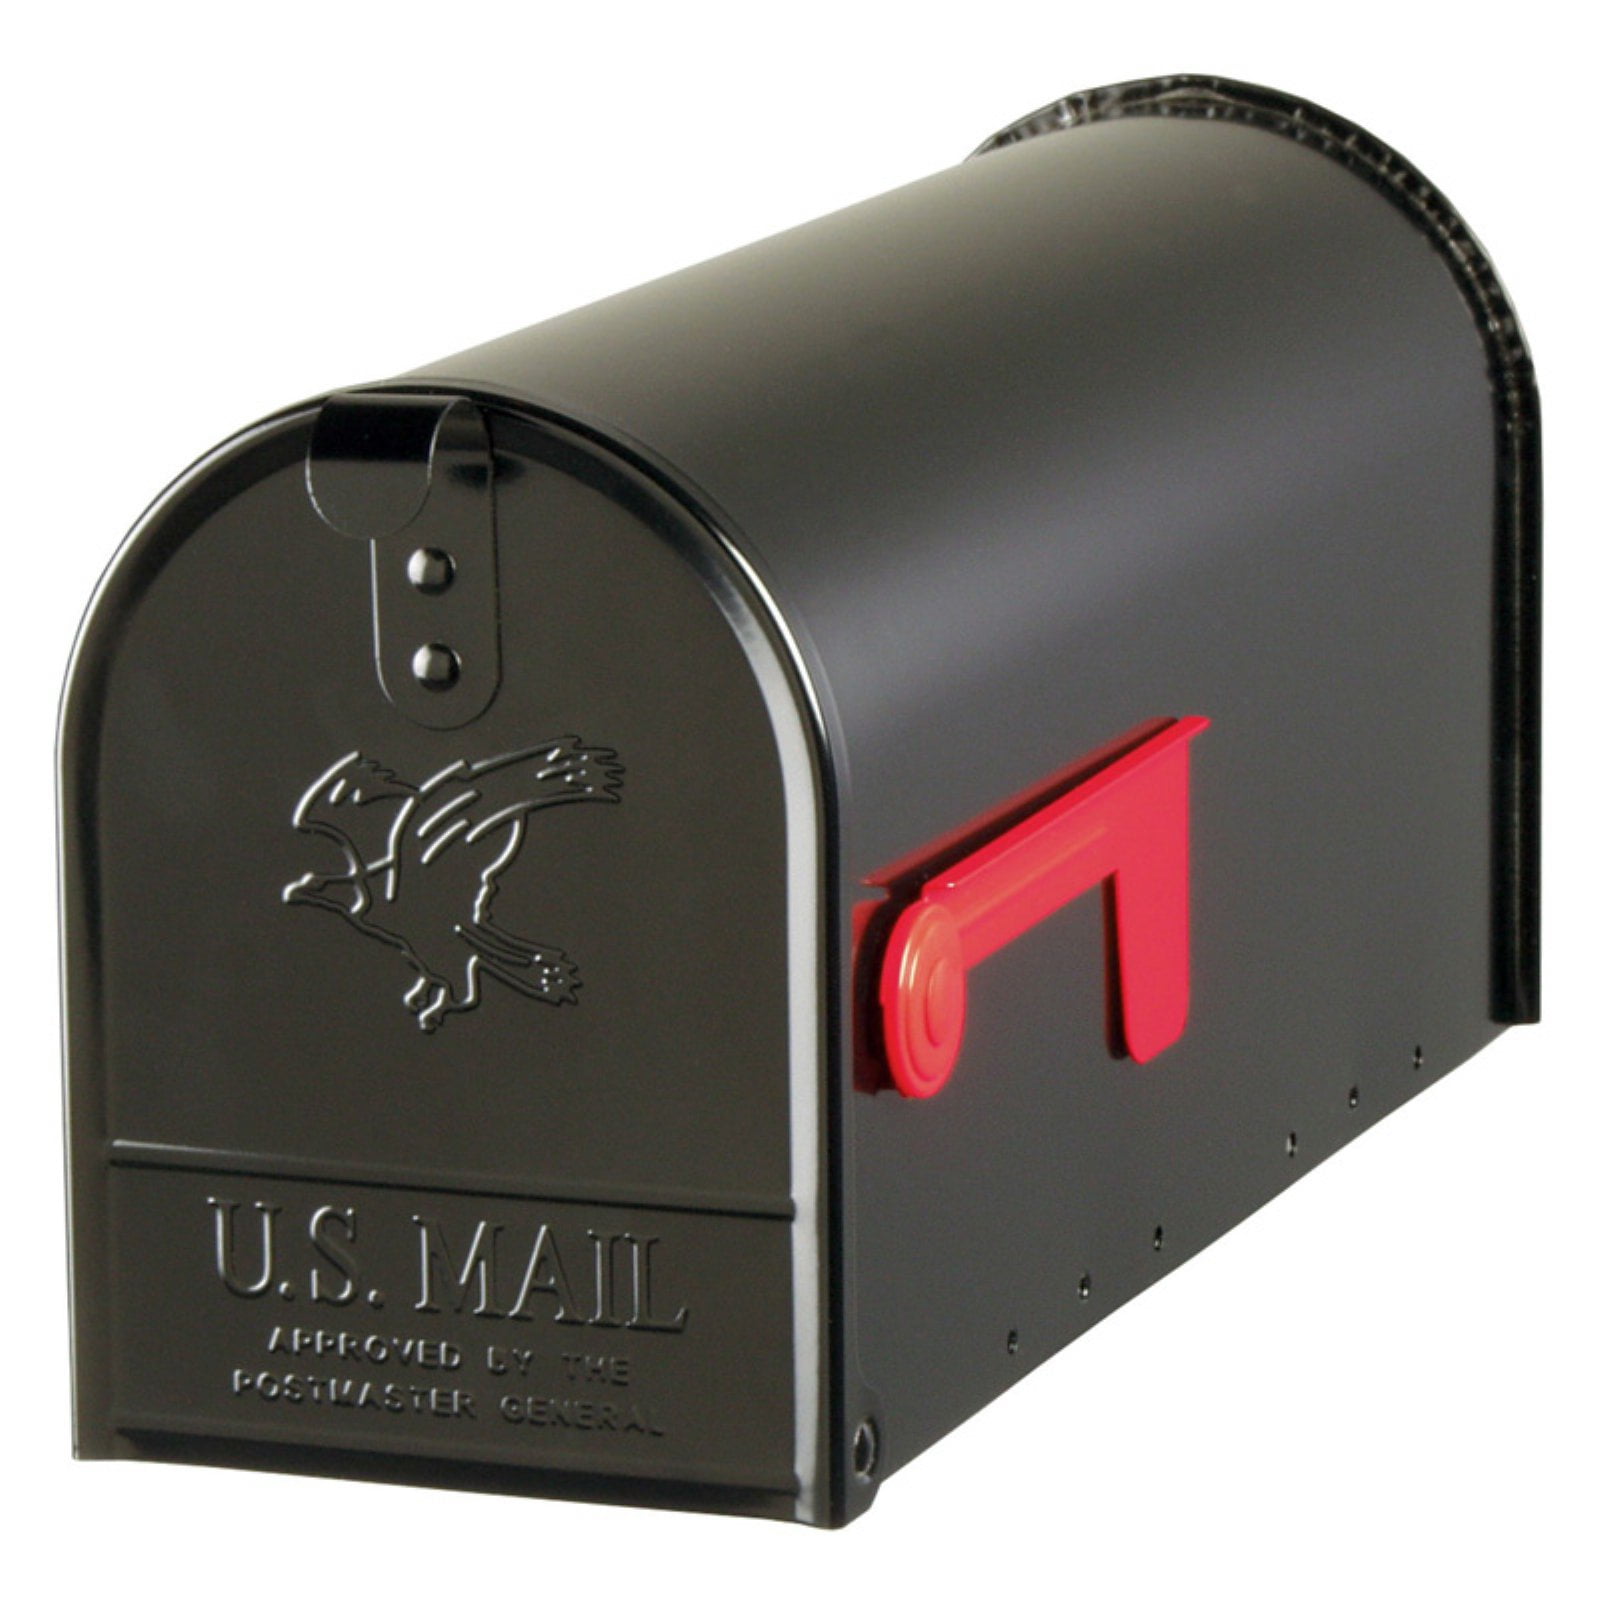 Mailbox Medium Galvanized Steel Post-Mount in Black with Outgoing Mail Indicator 